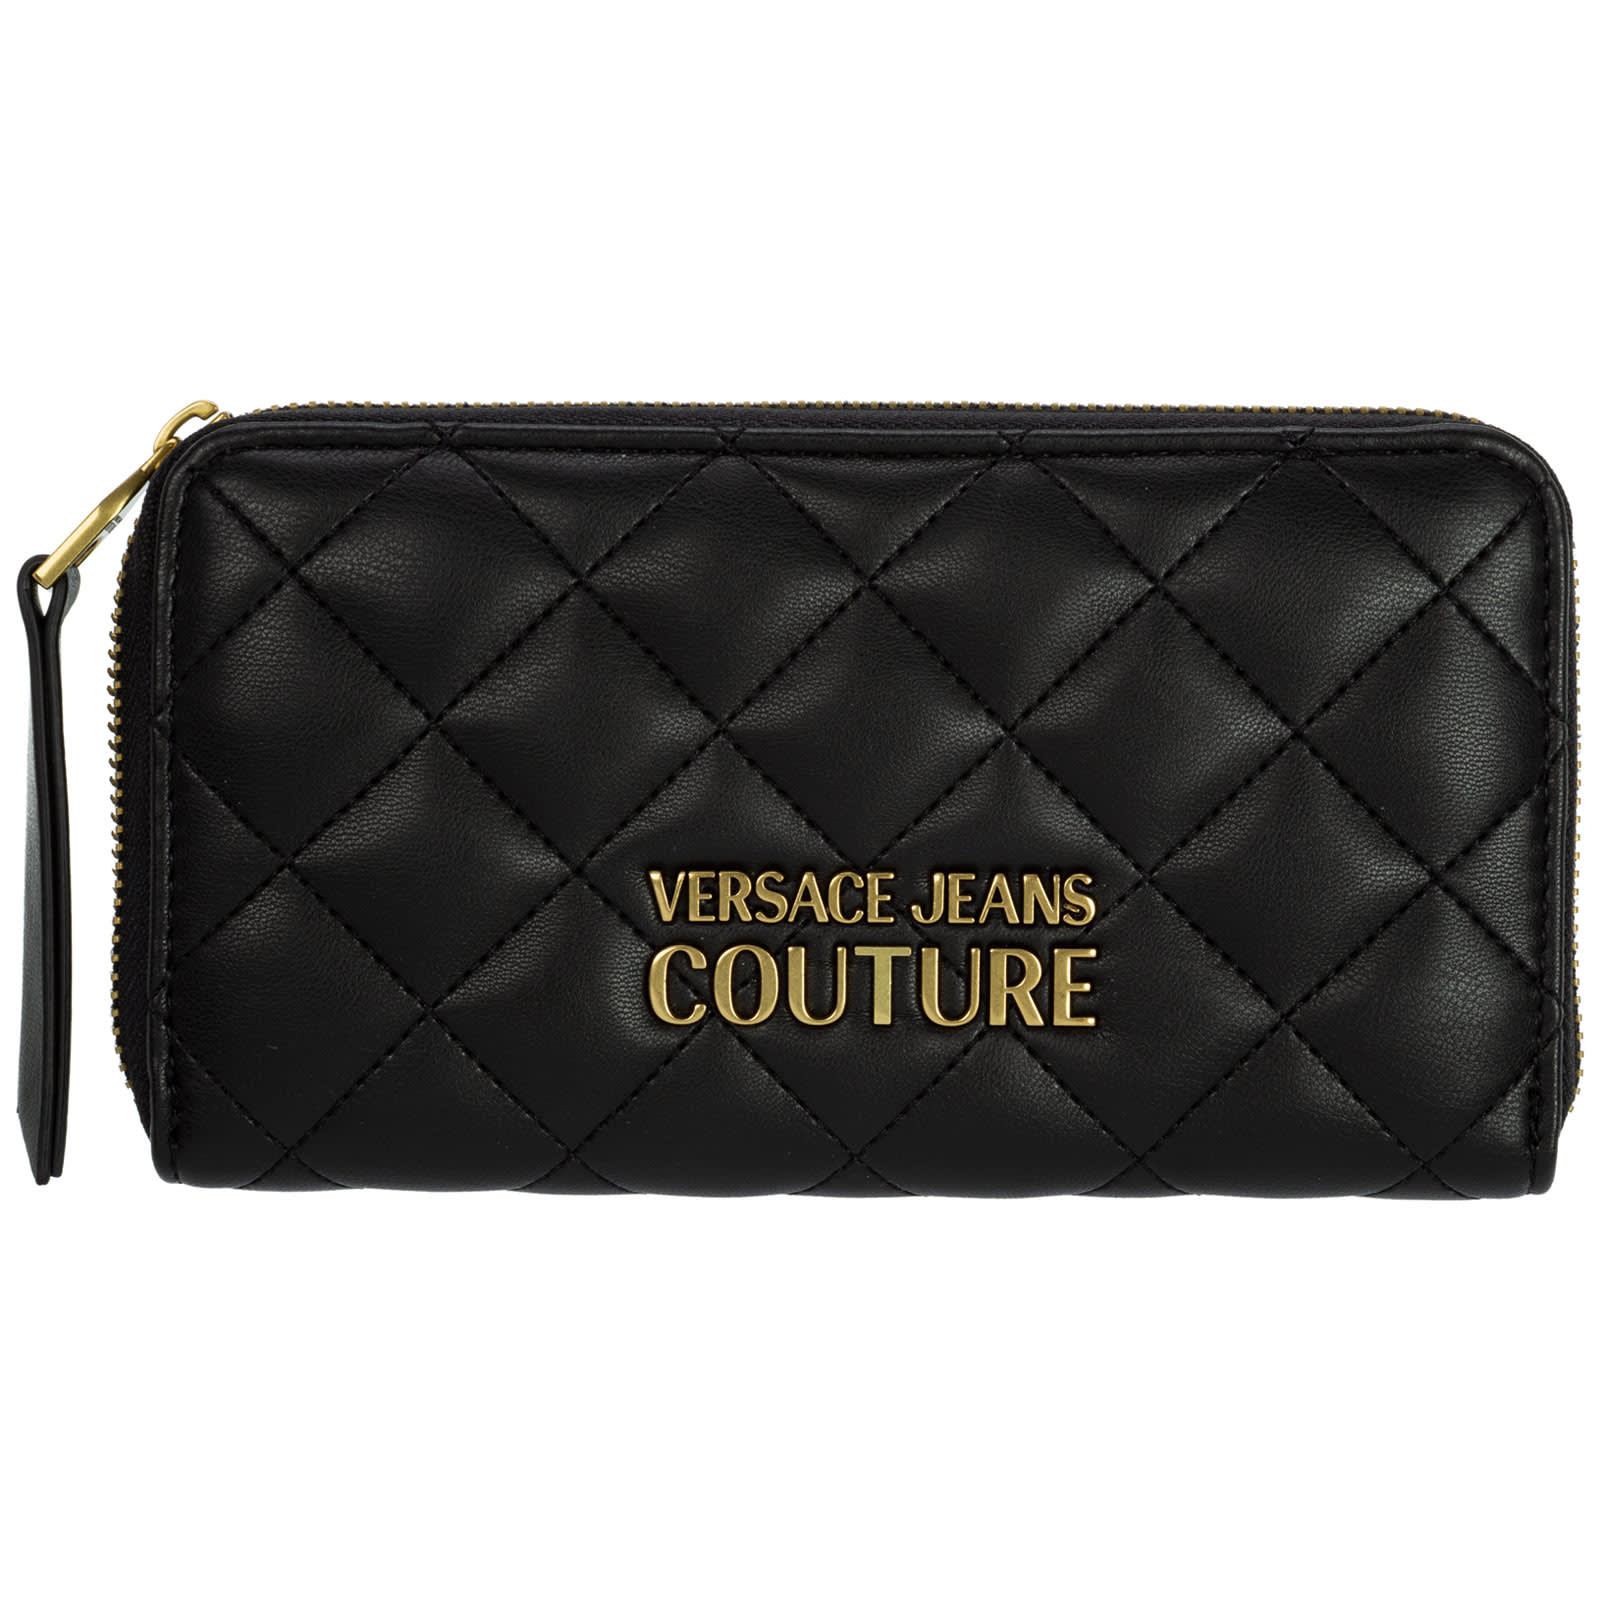 Versace Jeans Couture Garland Wallet